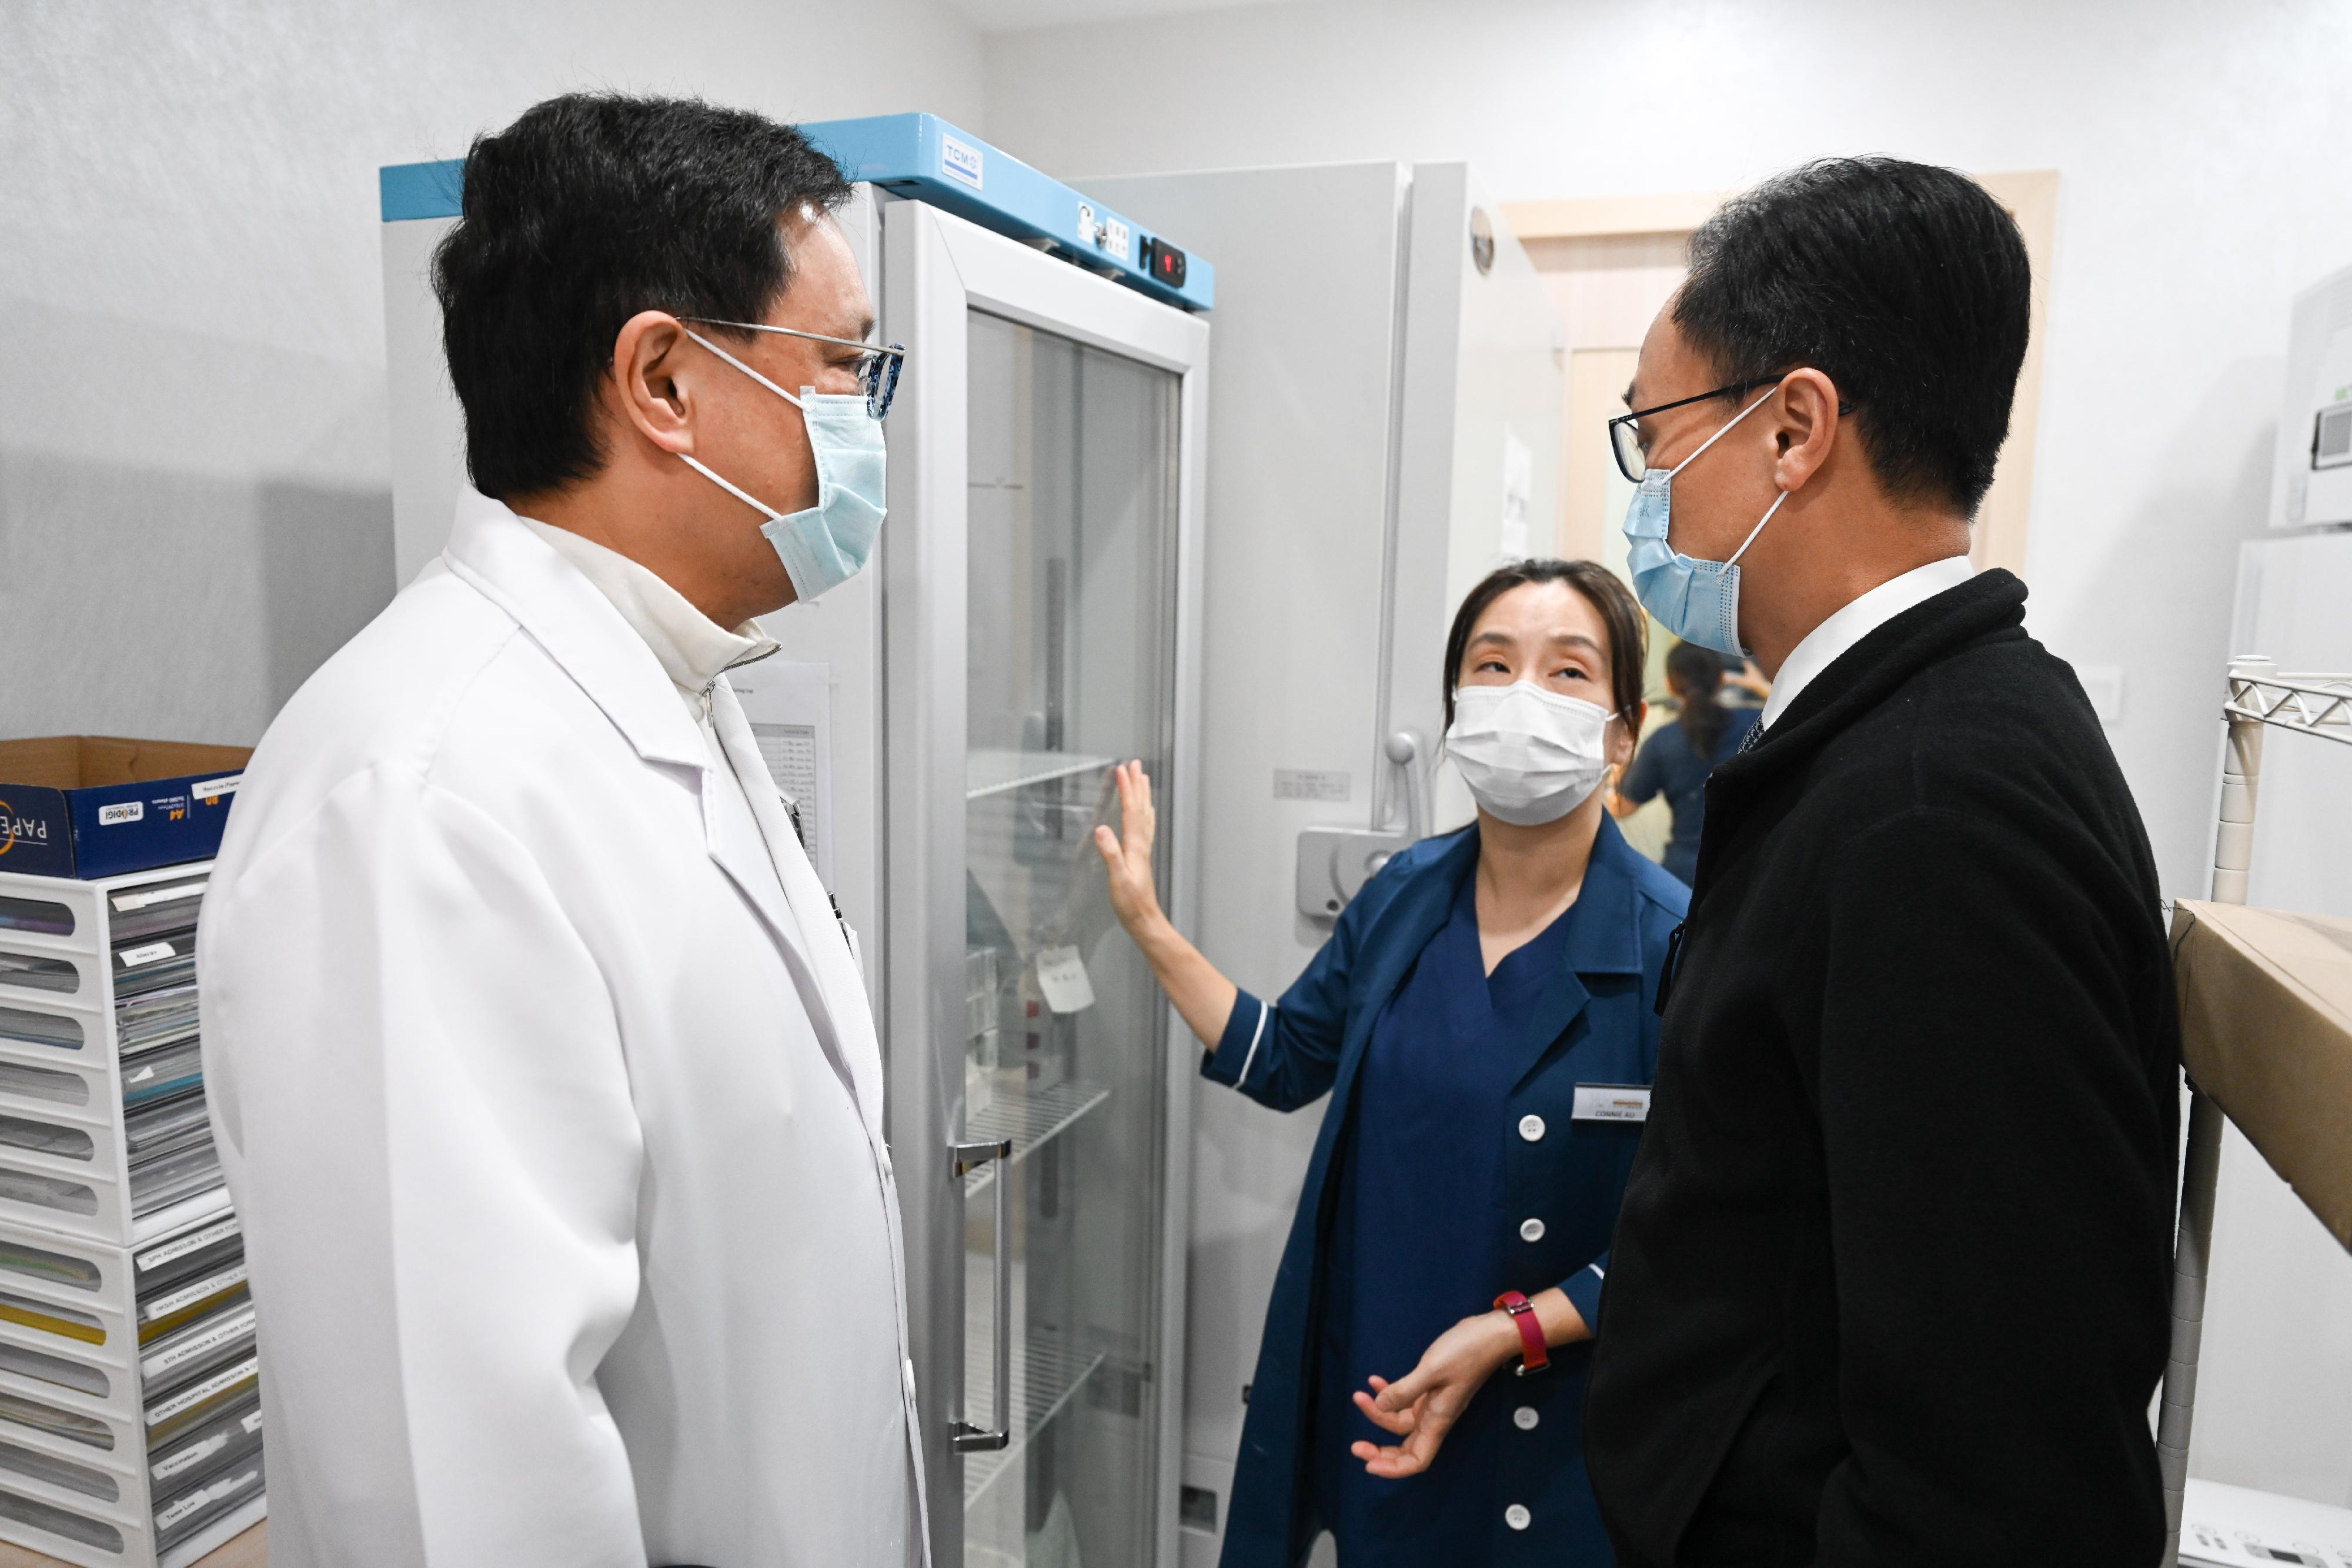 Members of the public, starting from today (December 6), can make appointments to receive the BioNTech vaccine at 24 vaccination venues of the eight private healthcare institutions that have enrolled in the BioNTech vaccination pilot scheme. Photo shows the Secretary for the Civil Service, Mr Patrick Nip (right), viewing the vaccine storage while visiting a clinic in Central.